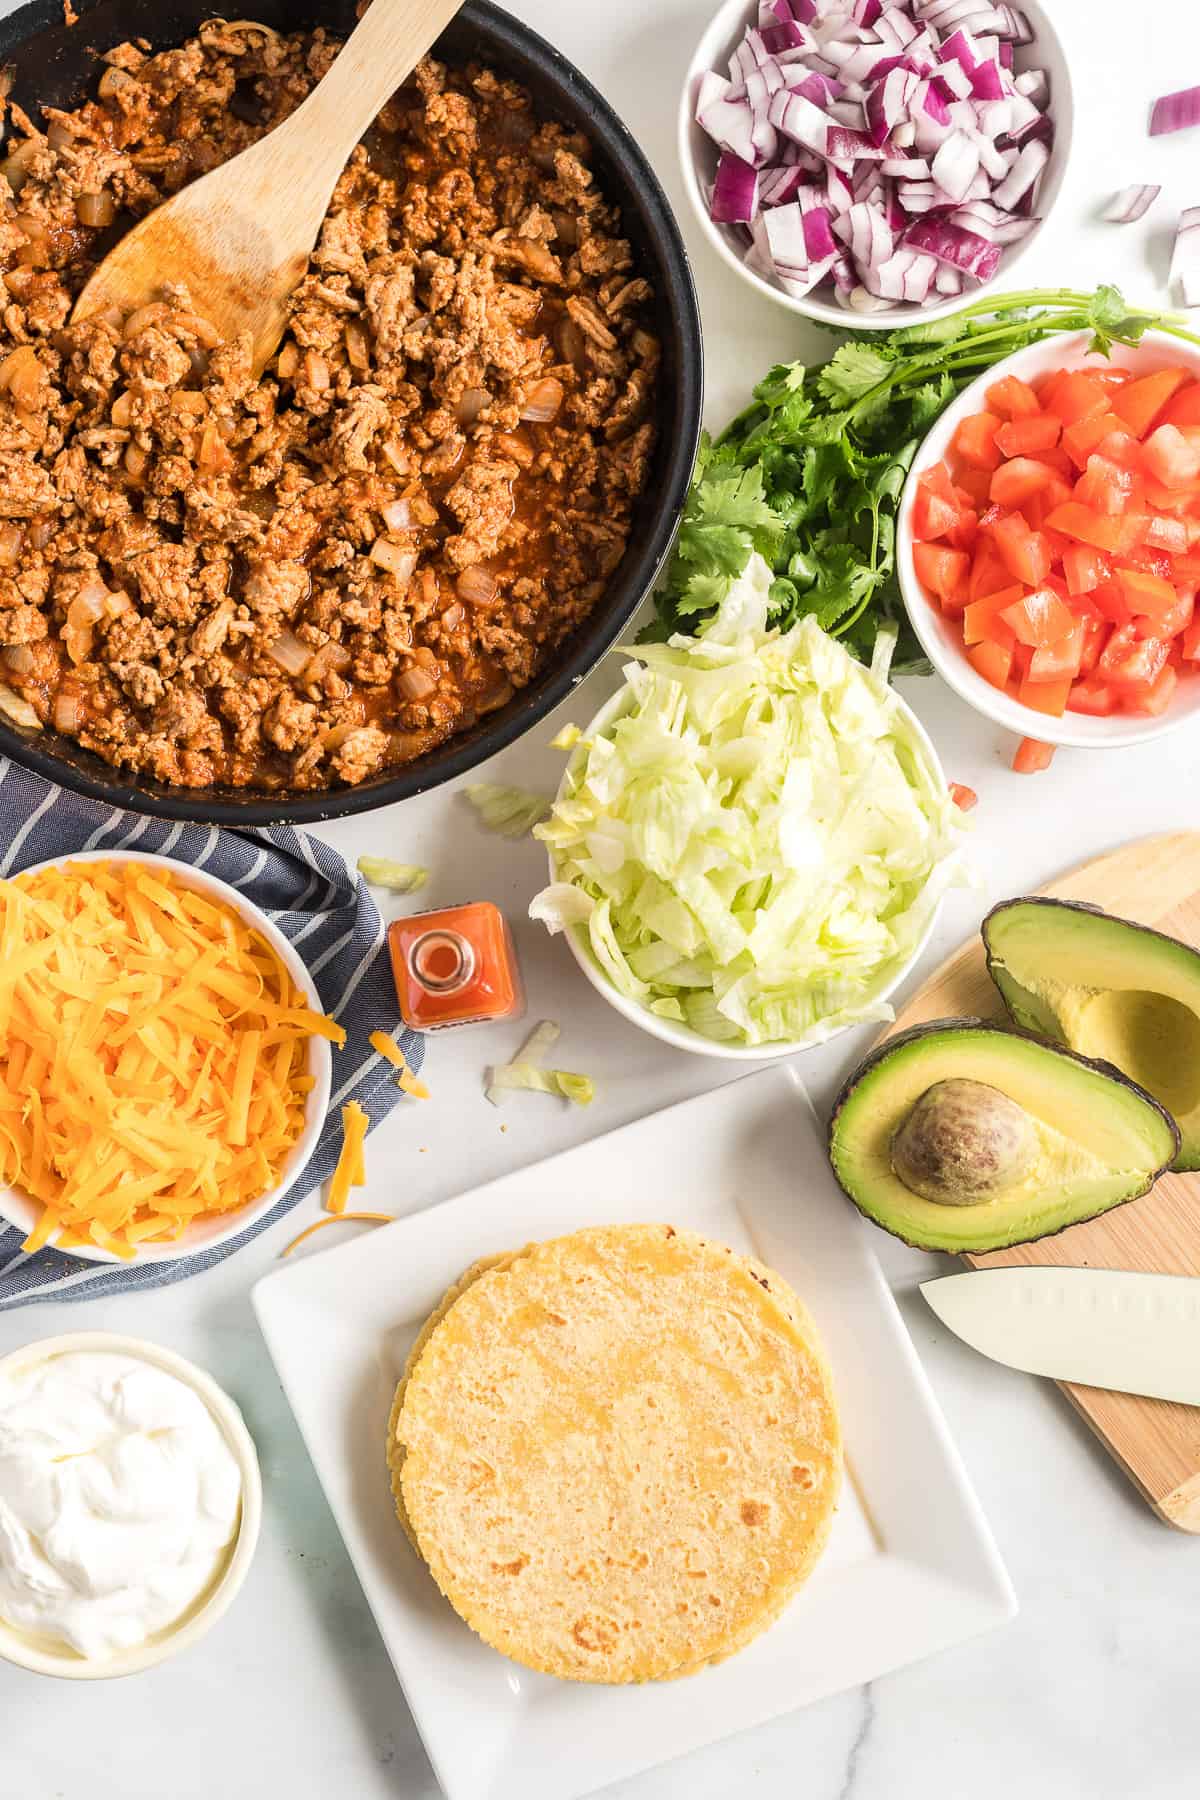 The cooked ground turkey, tortillas and optional toppings.